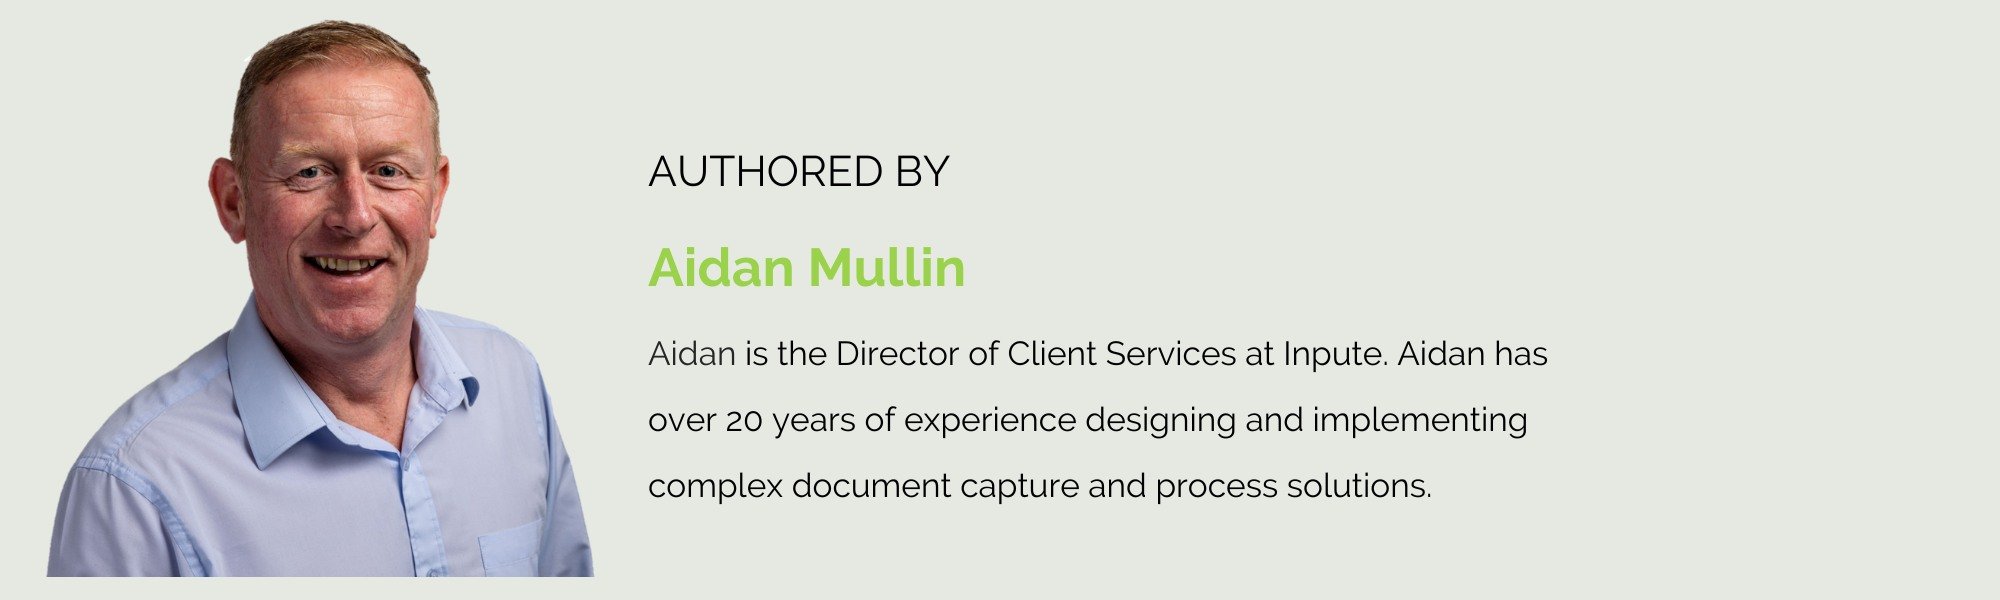 AUTHORED BY Aidan Mullin  Aidan is the Director of Client Services at Inpute. Aidan has over 20 years of experience designing and implementing complex document capture and process solutions.